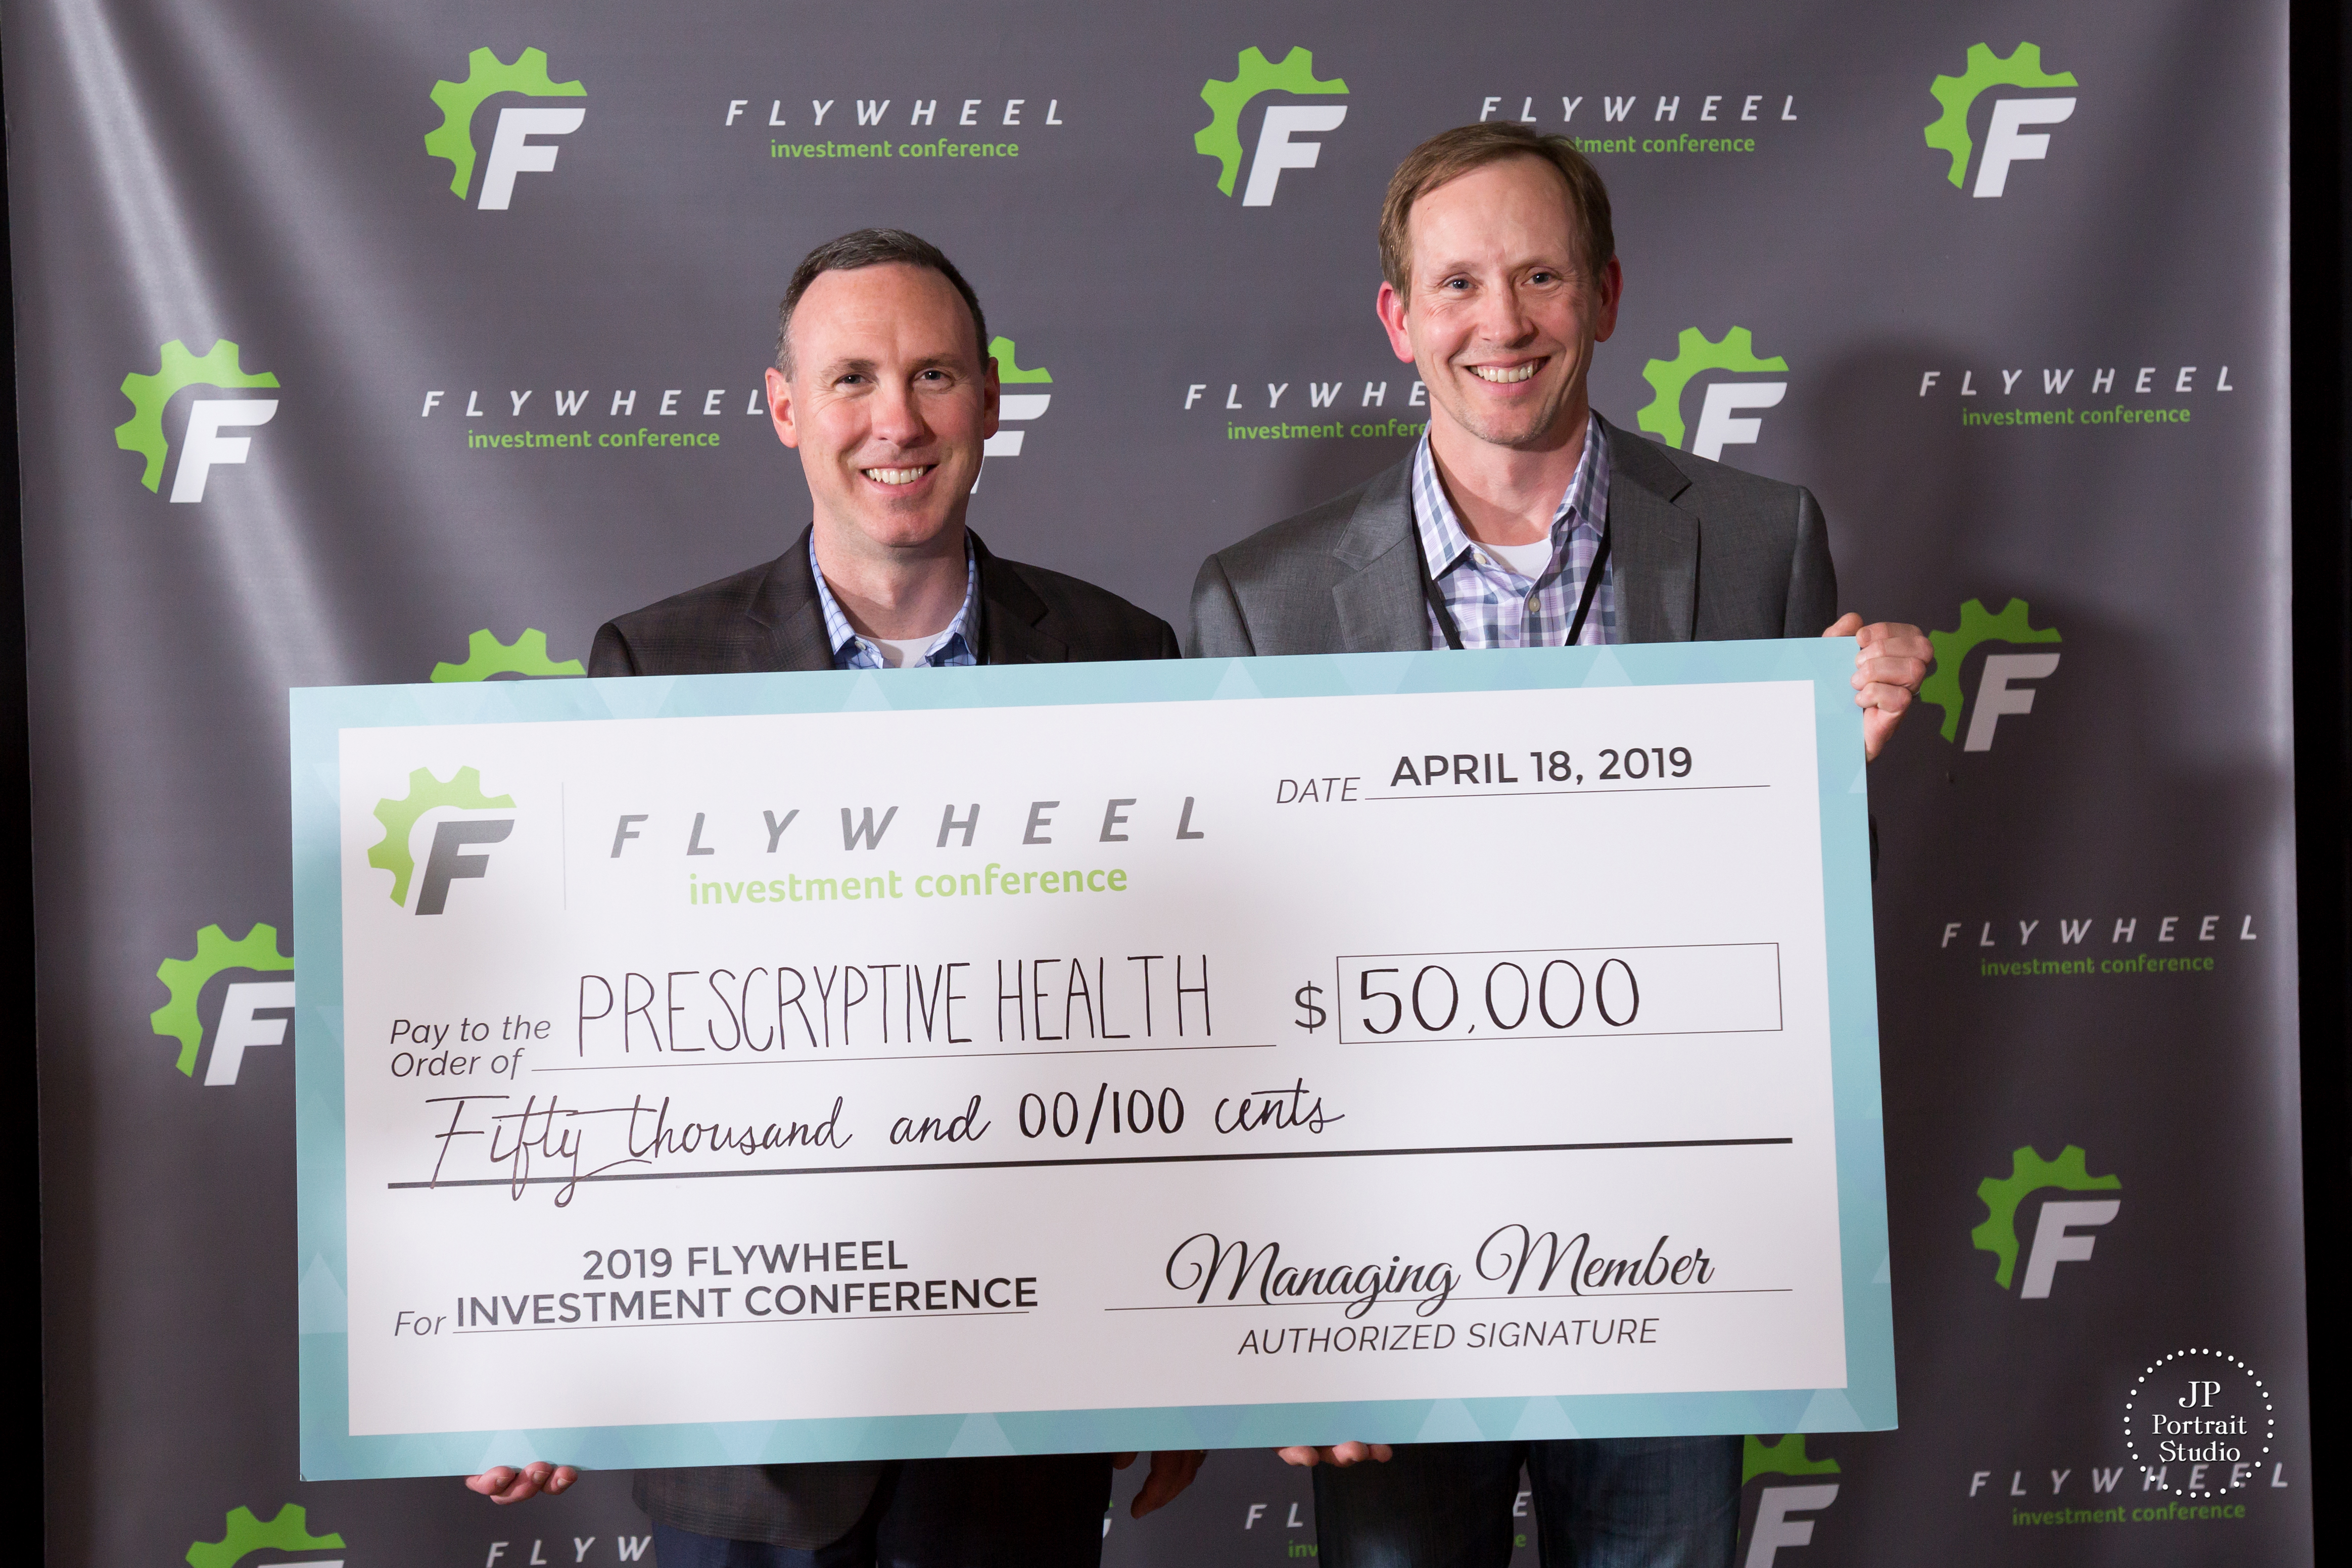 $185,000 in Funding Awarded During he 2019 Flywheel Investment Conference